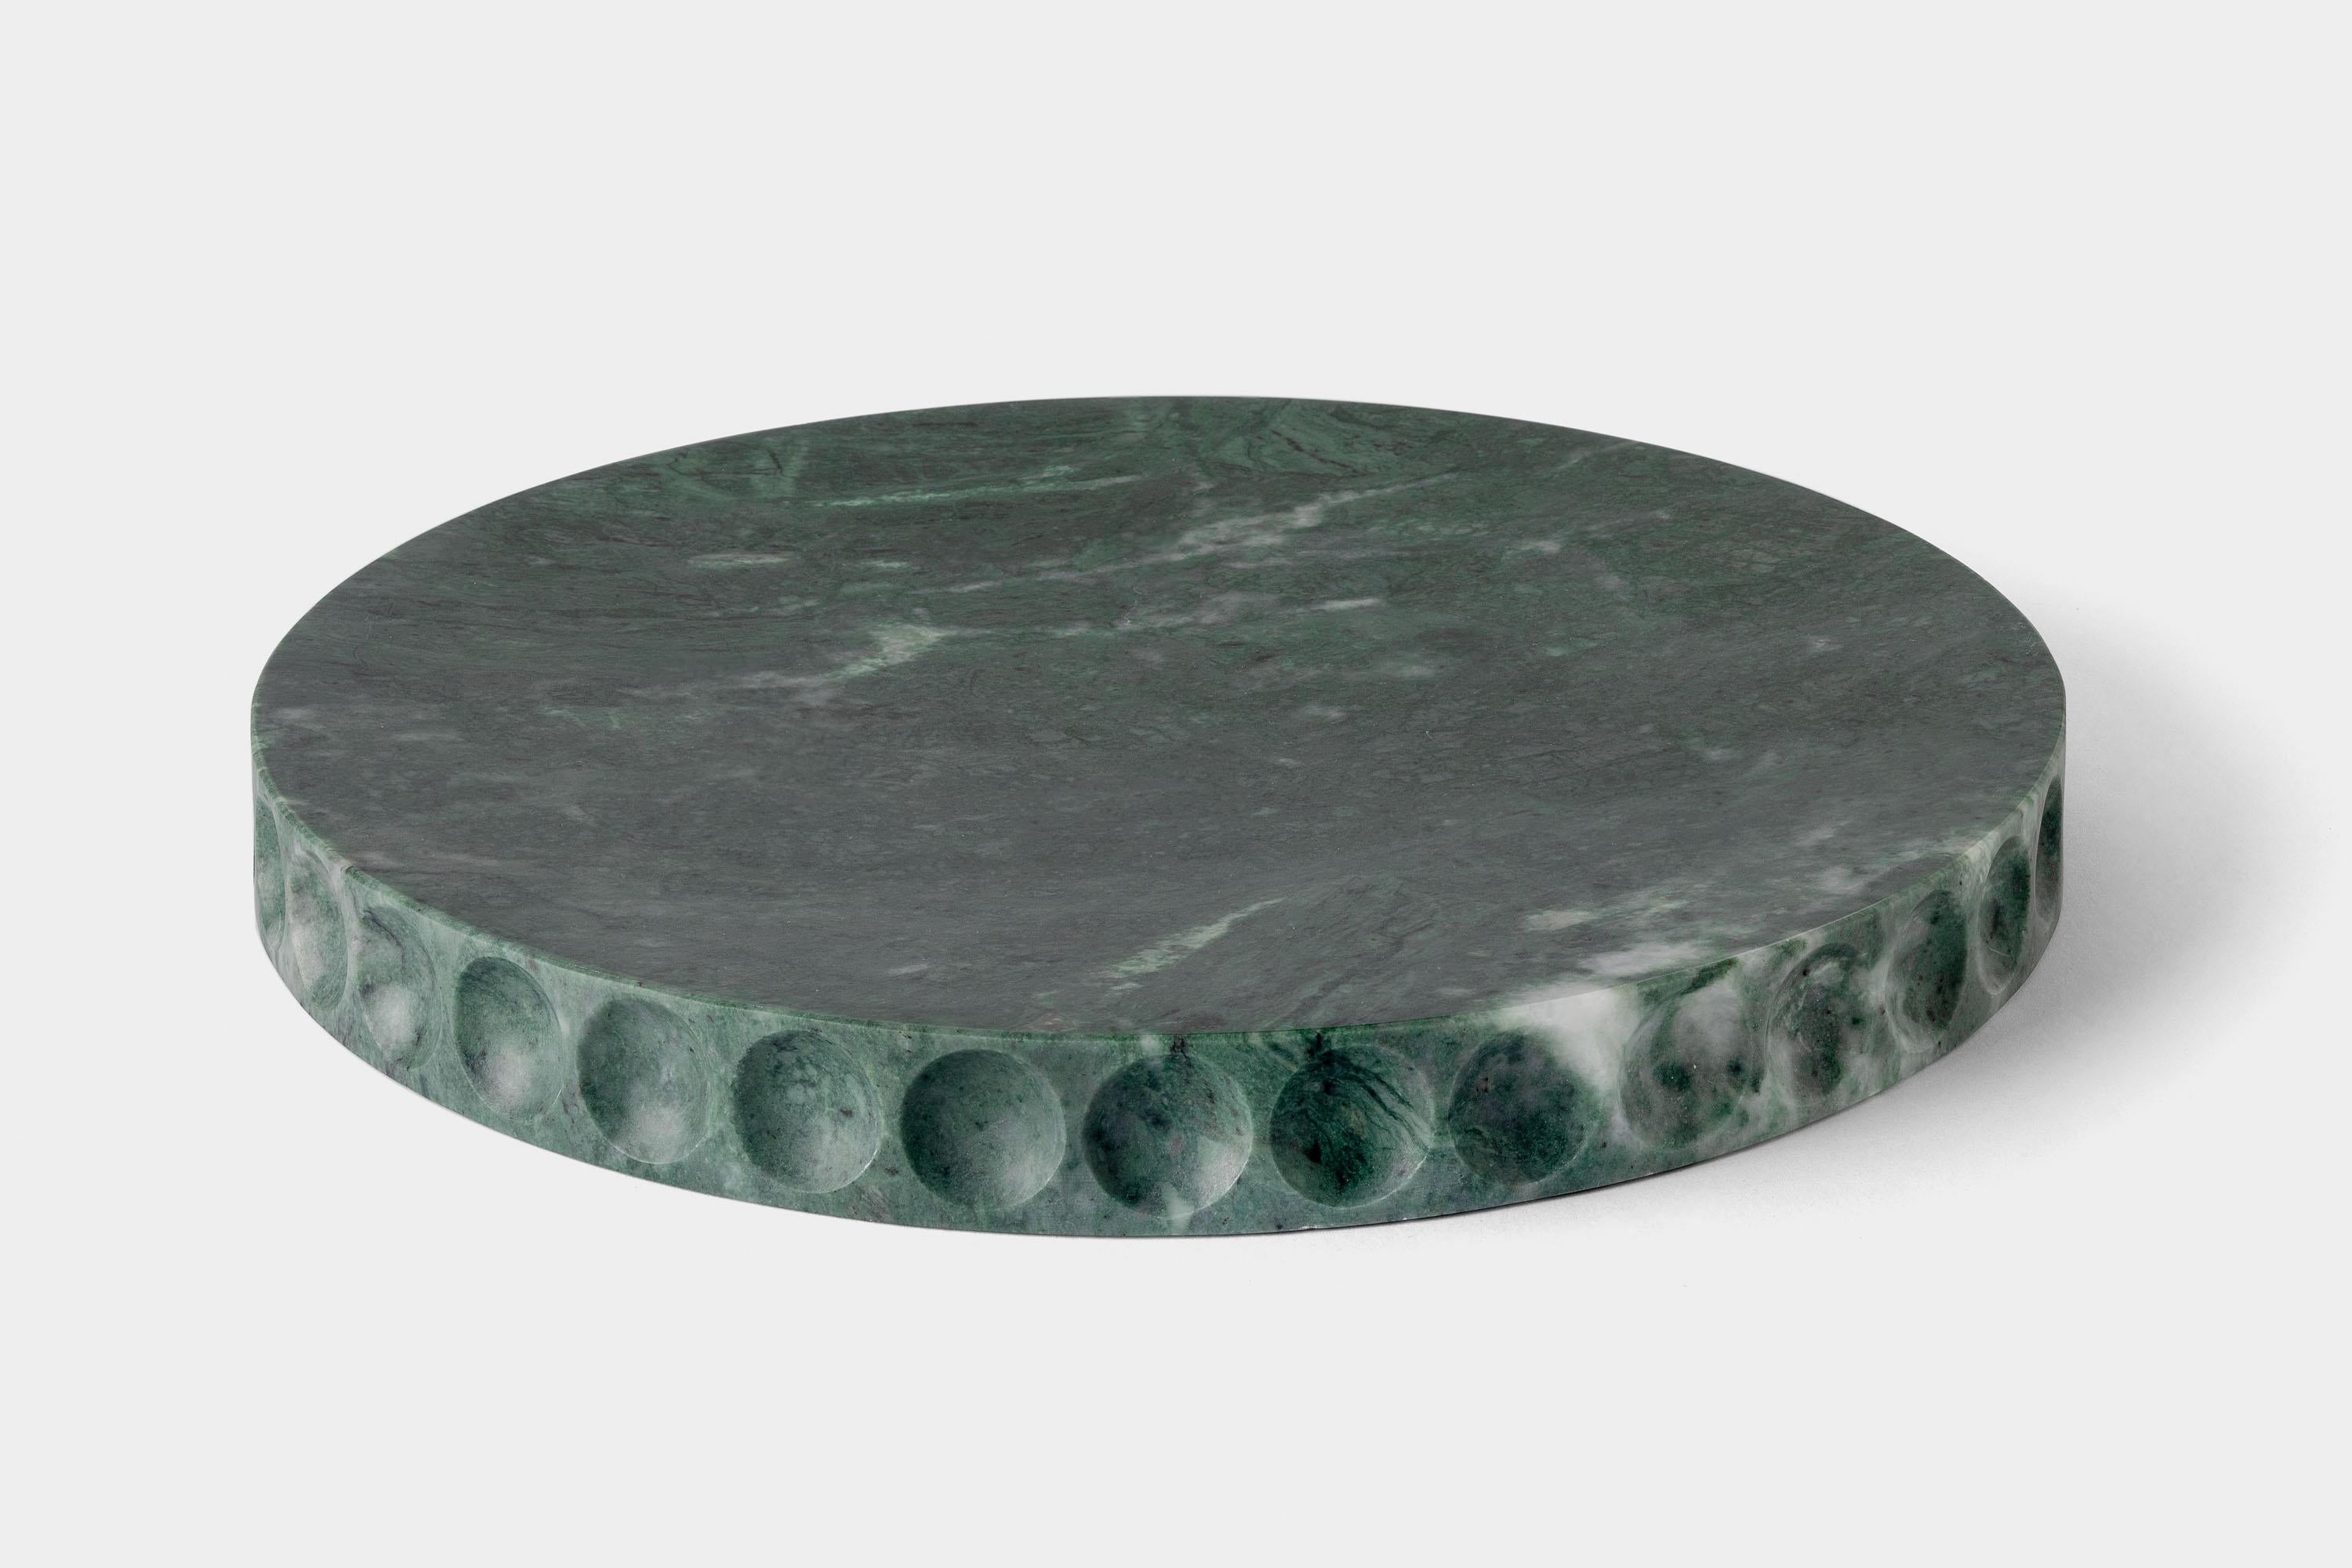 Mirage Lente by Studio Intervallo
Dimensions: D 30 x H 3.2 cm
Materials: green Guatemala marble.
Available in other stones.

The Mirage collection comes from the monolithic materiality of stone. Shape and function coincide, creating an element